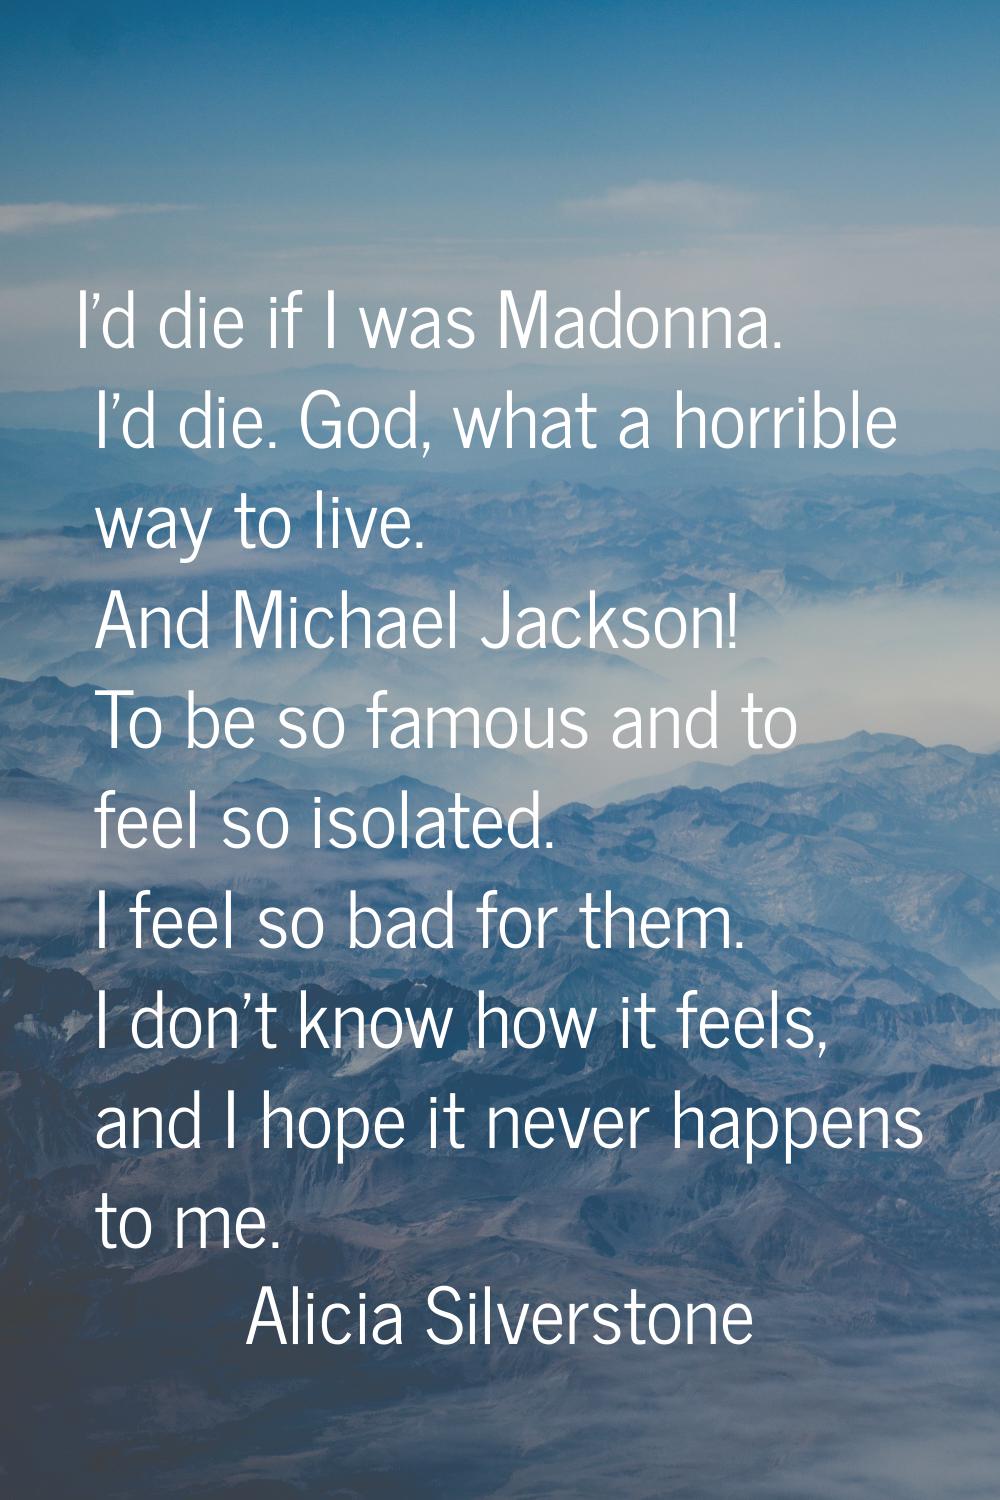 I'd die if I was Madonna. I'd die. God, what a horrible way to live. And Michael Jackson! To be so 